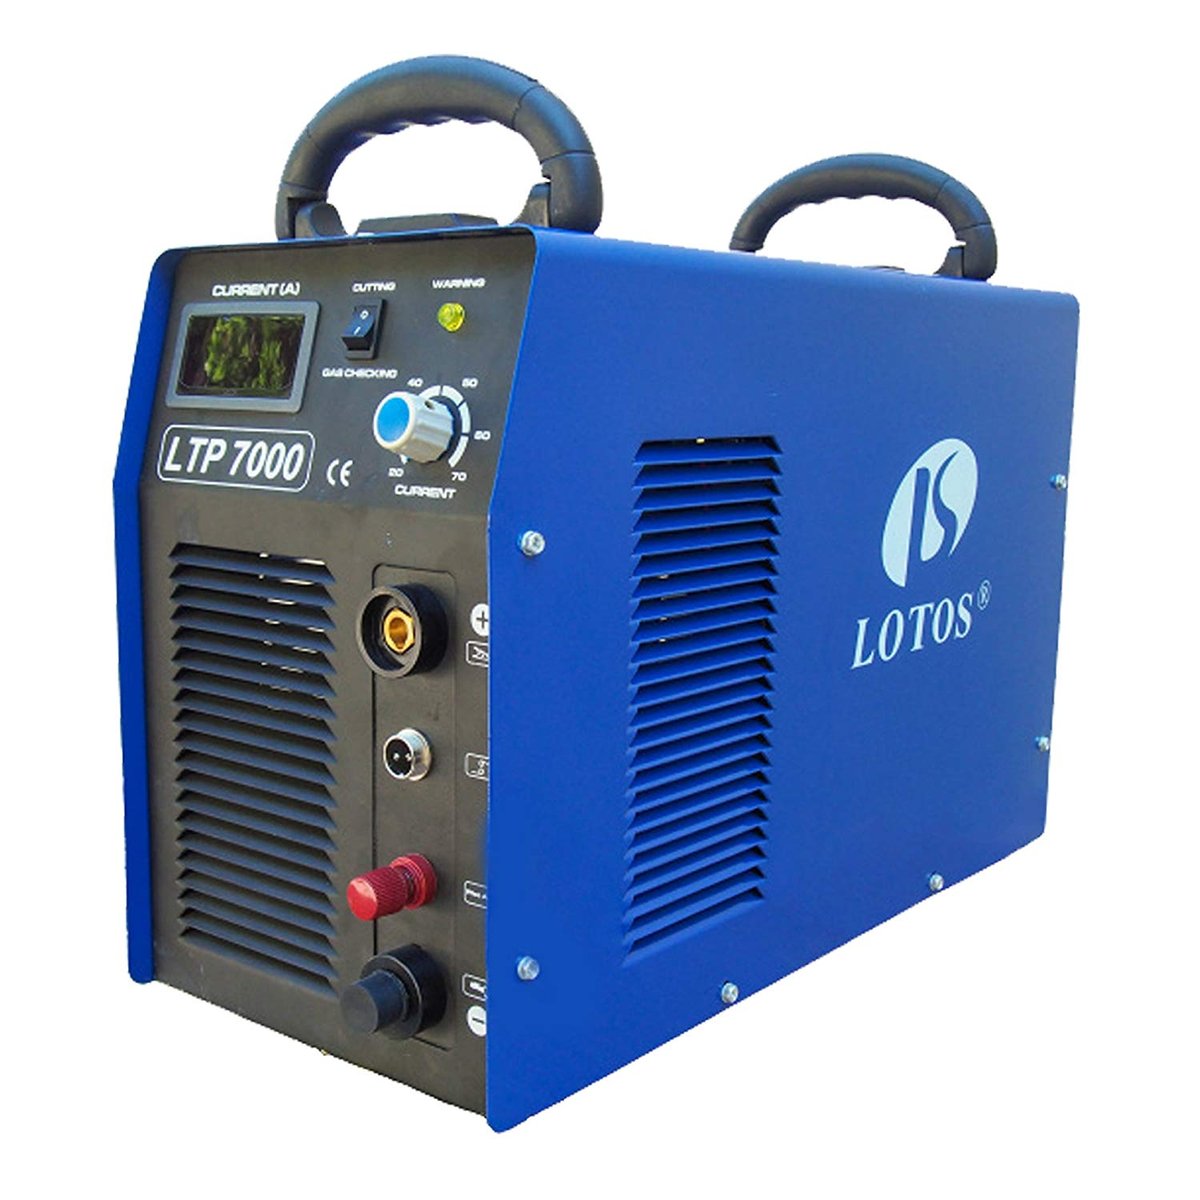 Image of Plasma Cutter Buyer's Guide: Lotos LTP7000